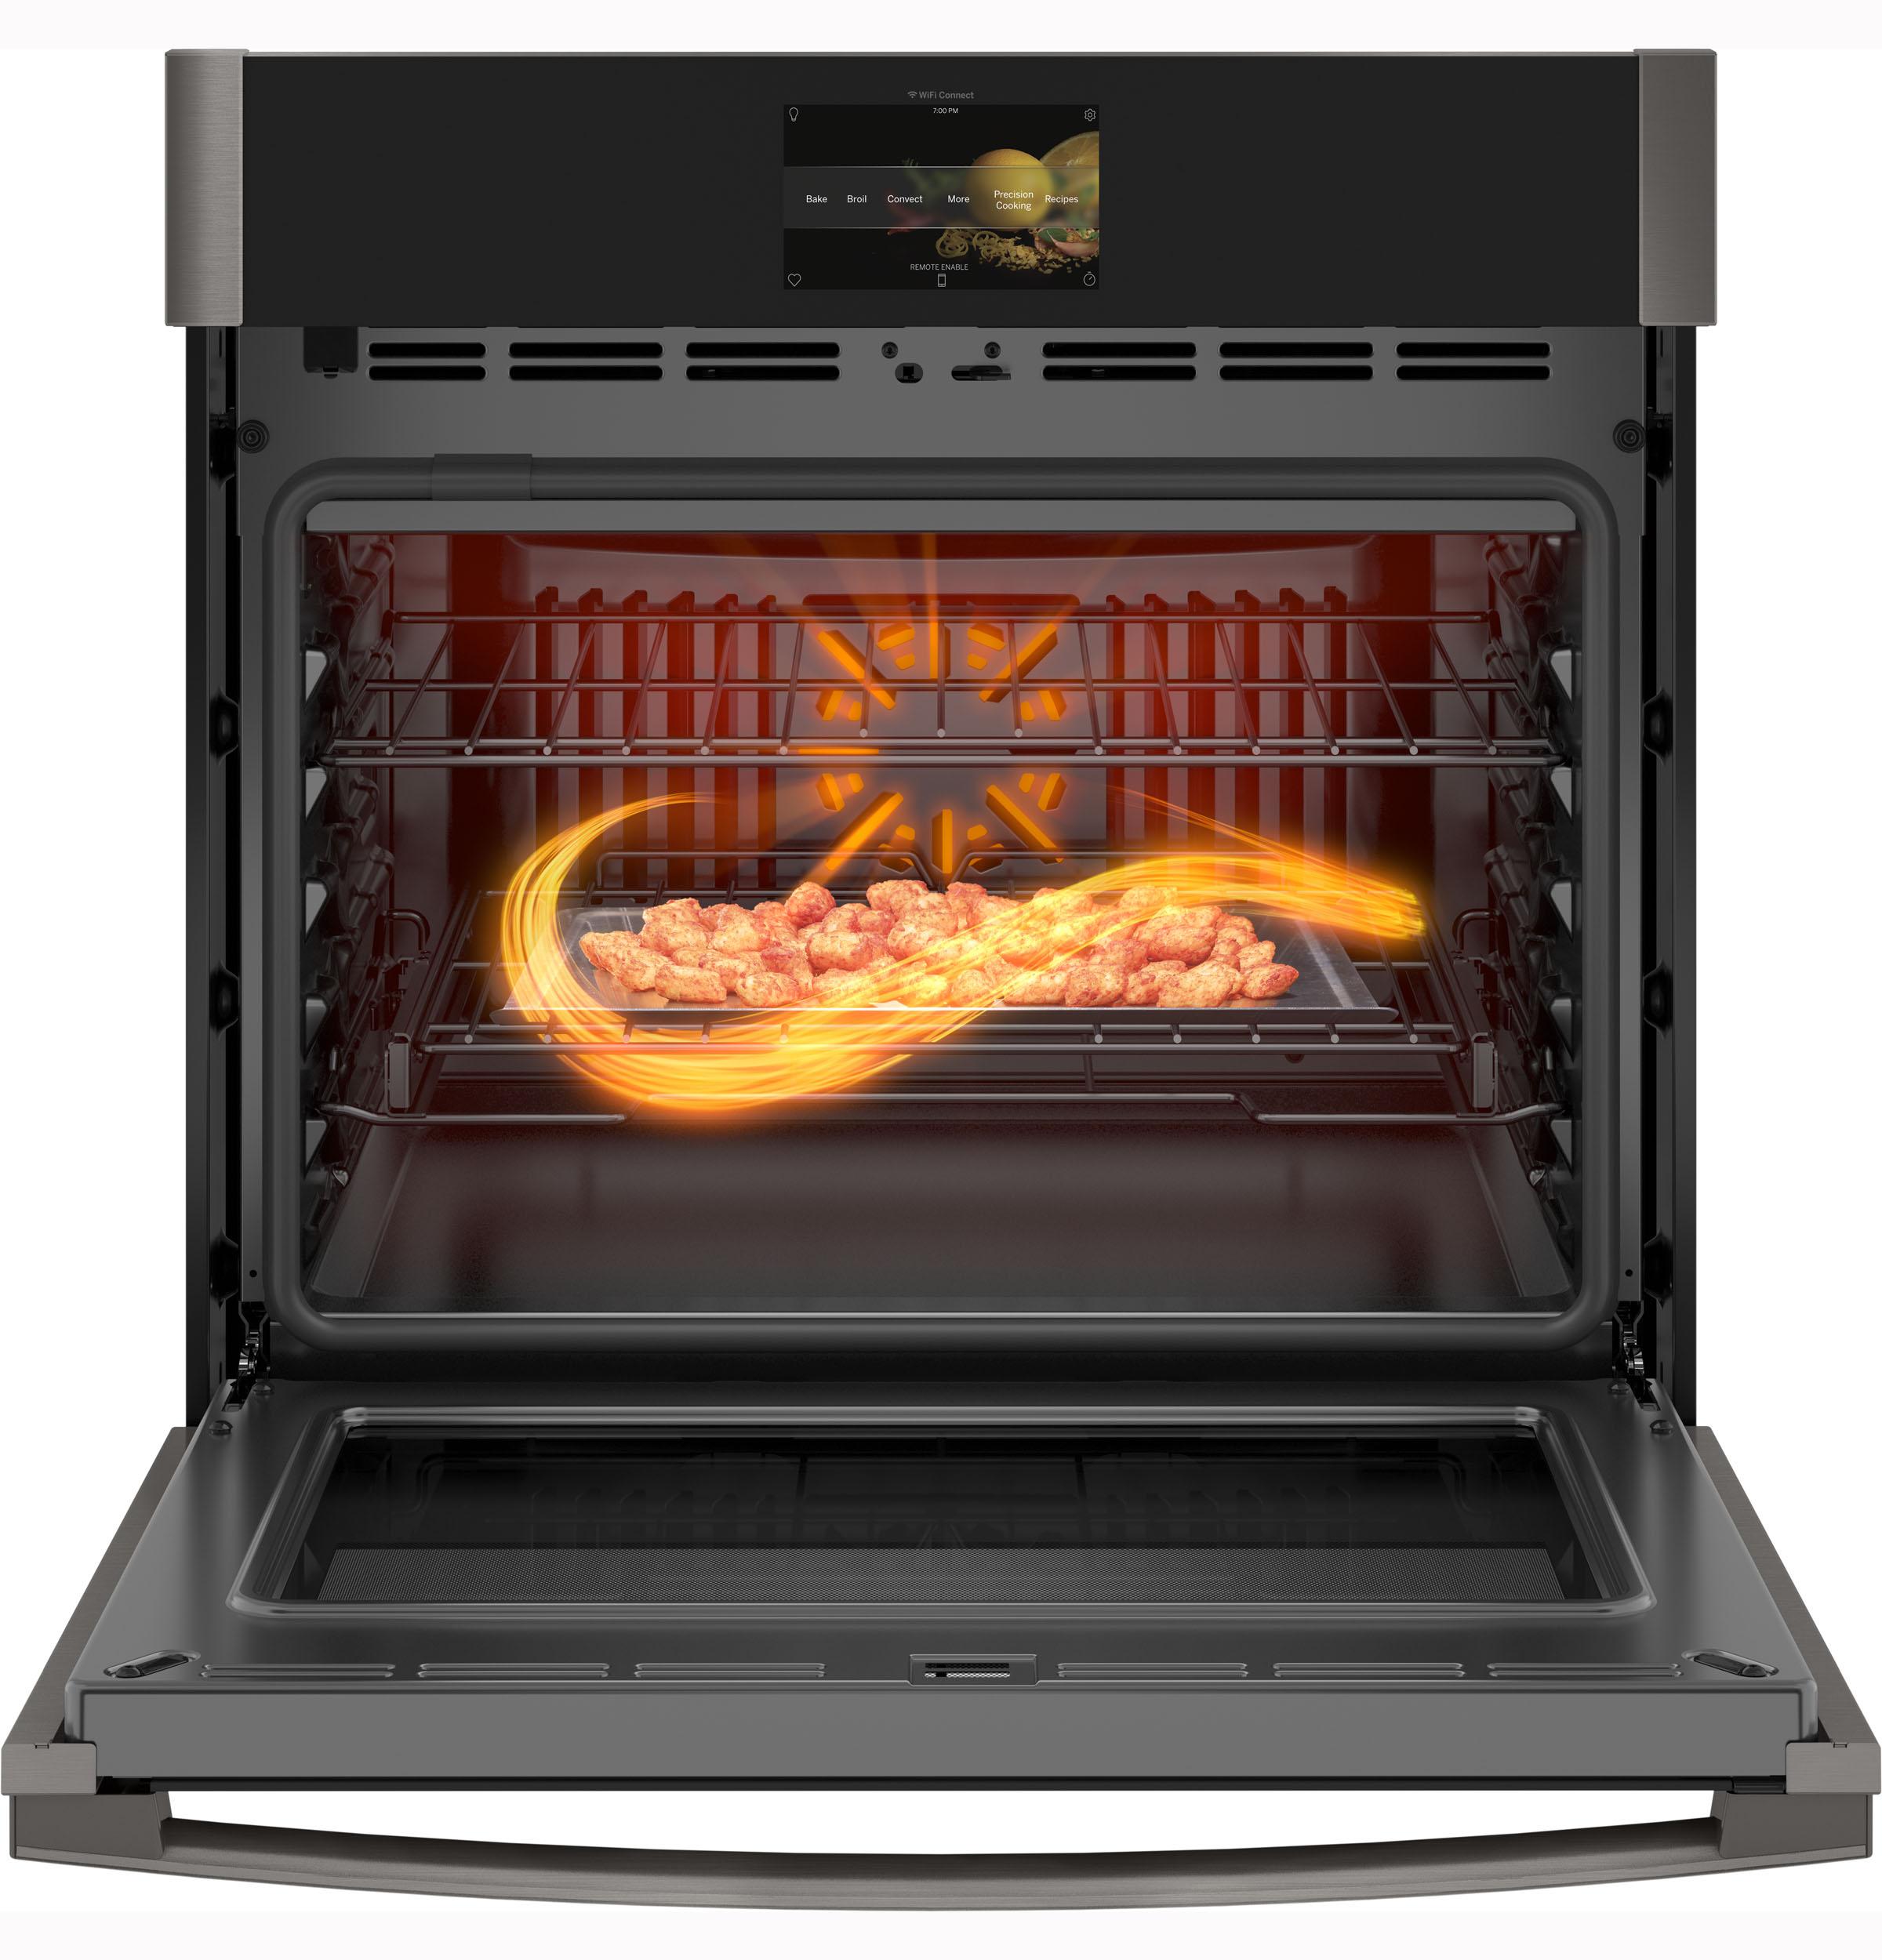 GE Profile™ 30" Smart Built-In Convection Single Wall Oven with No Preheat Air Fry and Precision Cooking